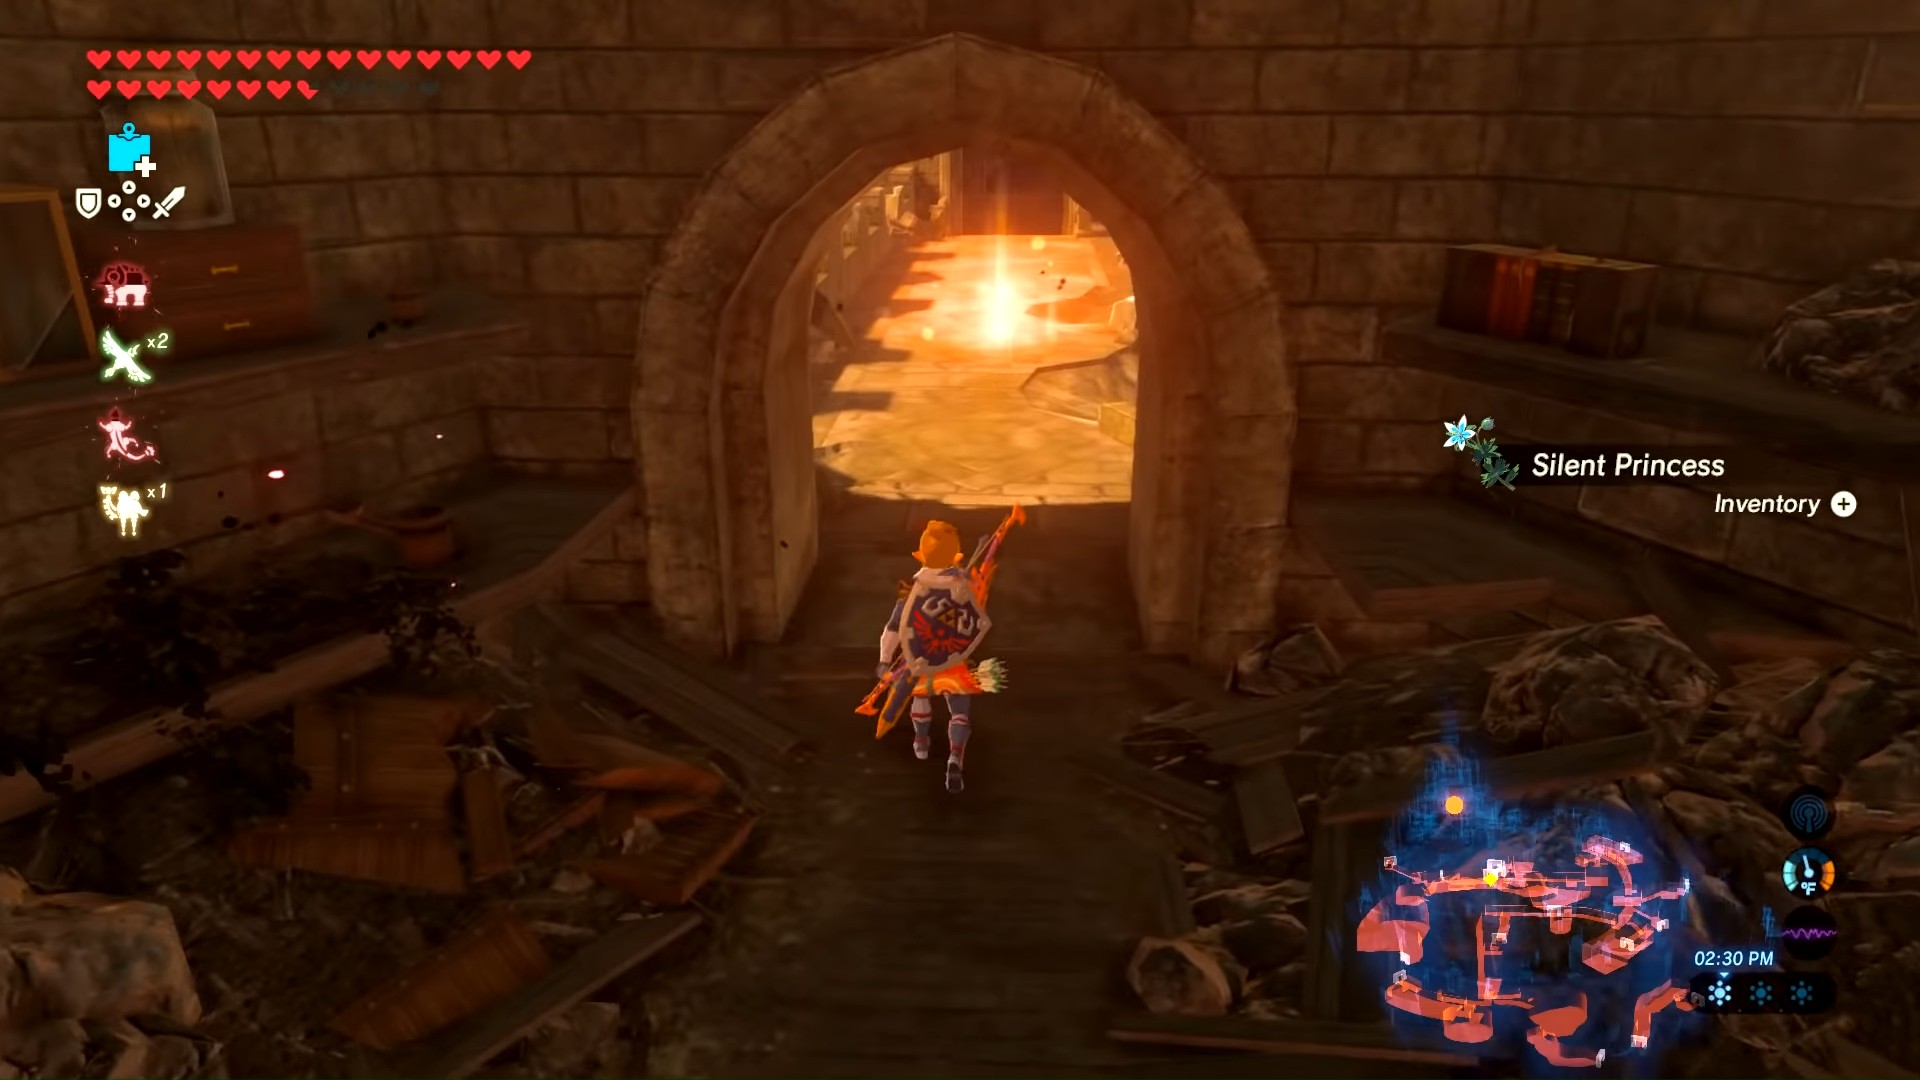 How to reach the Hyrule Castle memory easily in Breath of the Wild